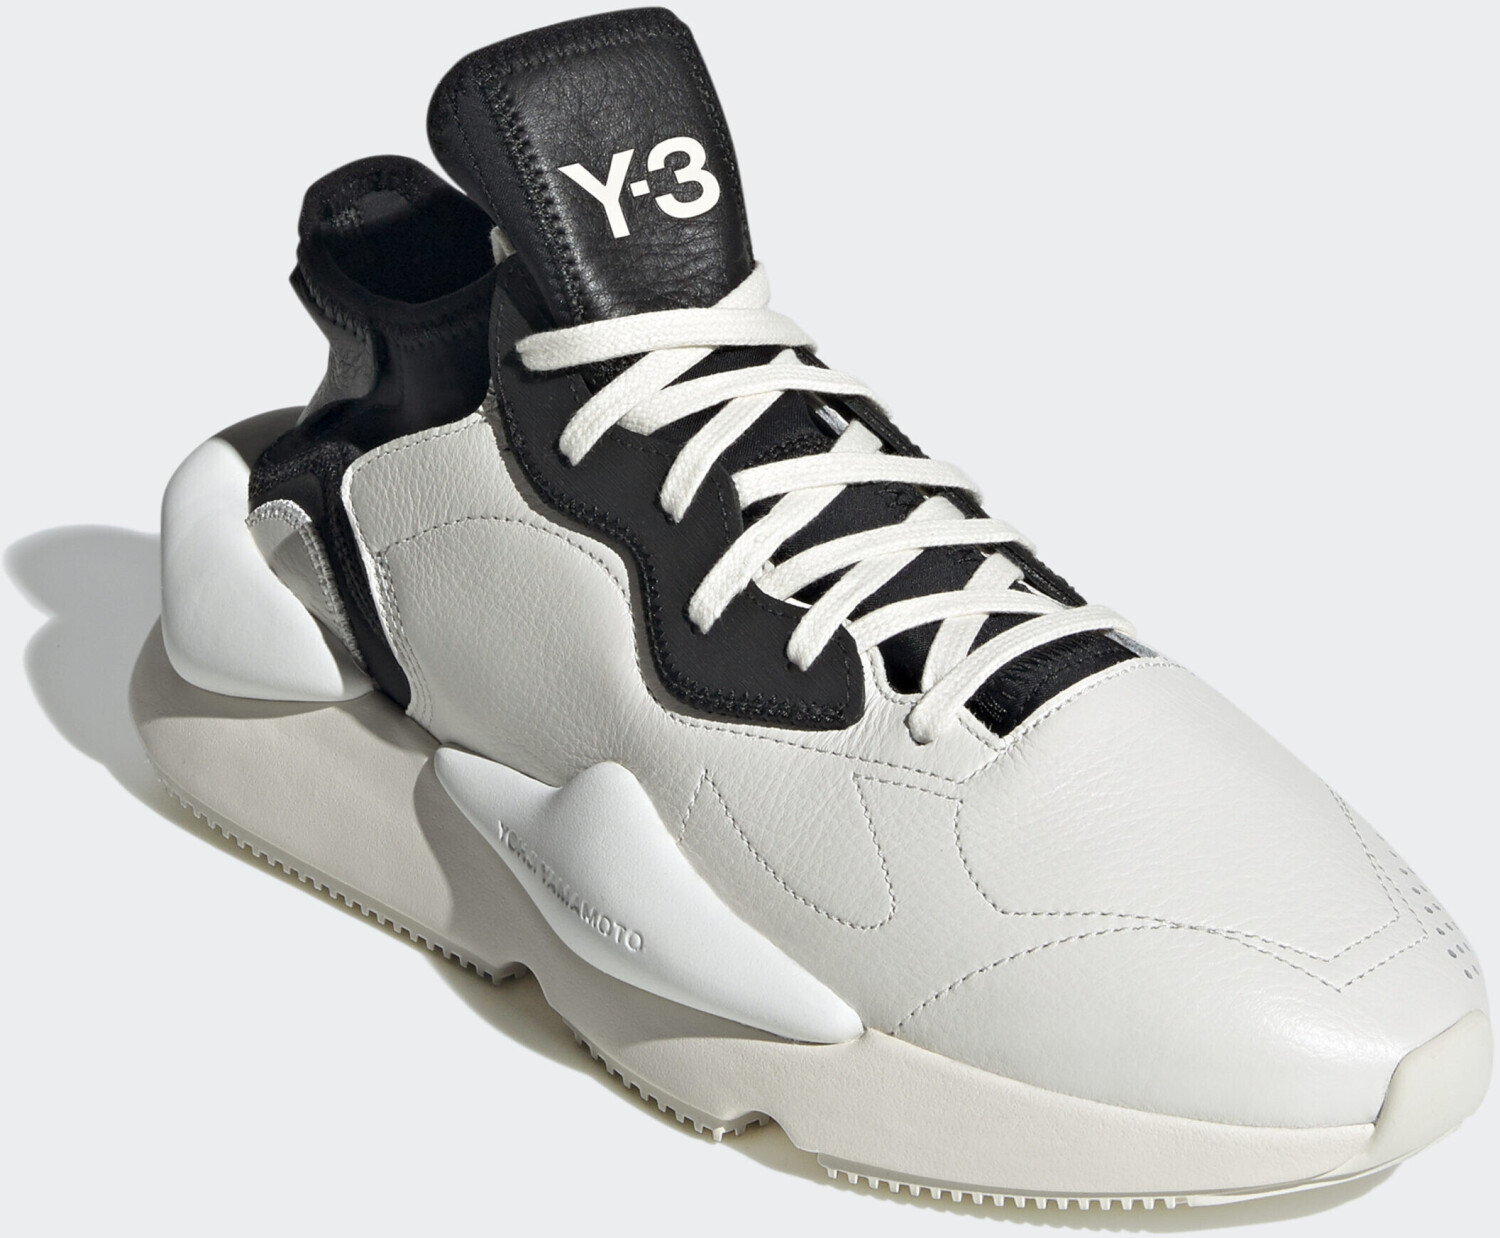 Buy Adidas Y-3 Kaiwa Core White/Off White/Black from £295.74 (Today ...